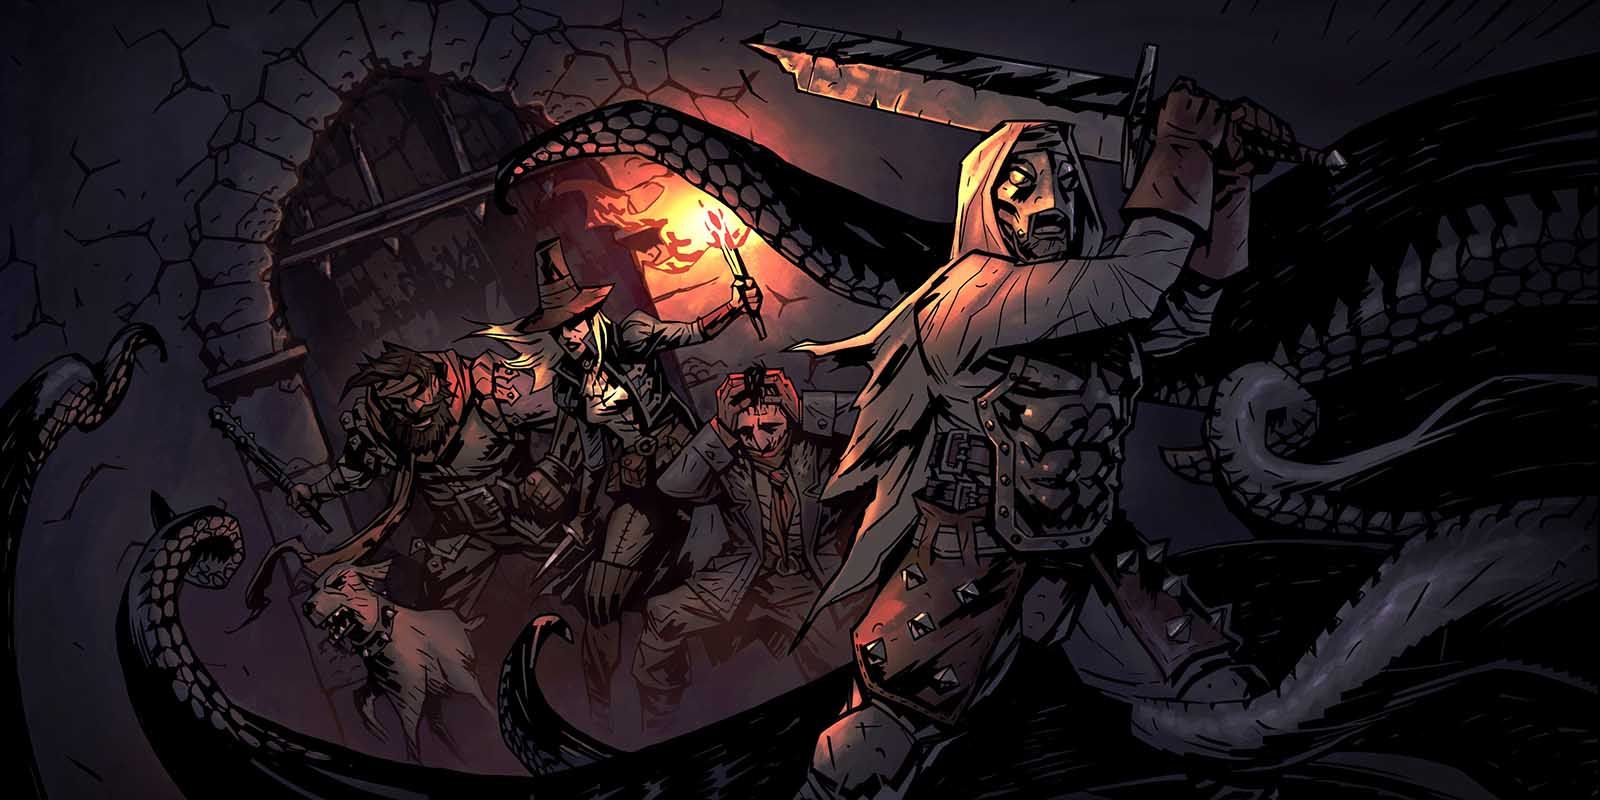 A Zealot slashes at tentacles in a dungeon in Darkest Dungeon